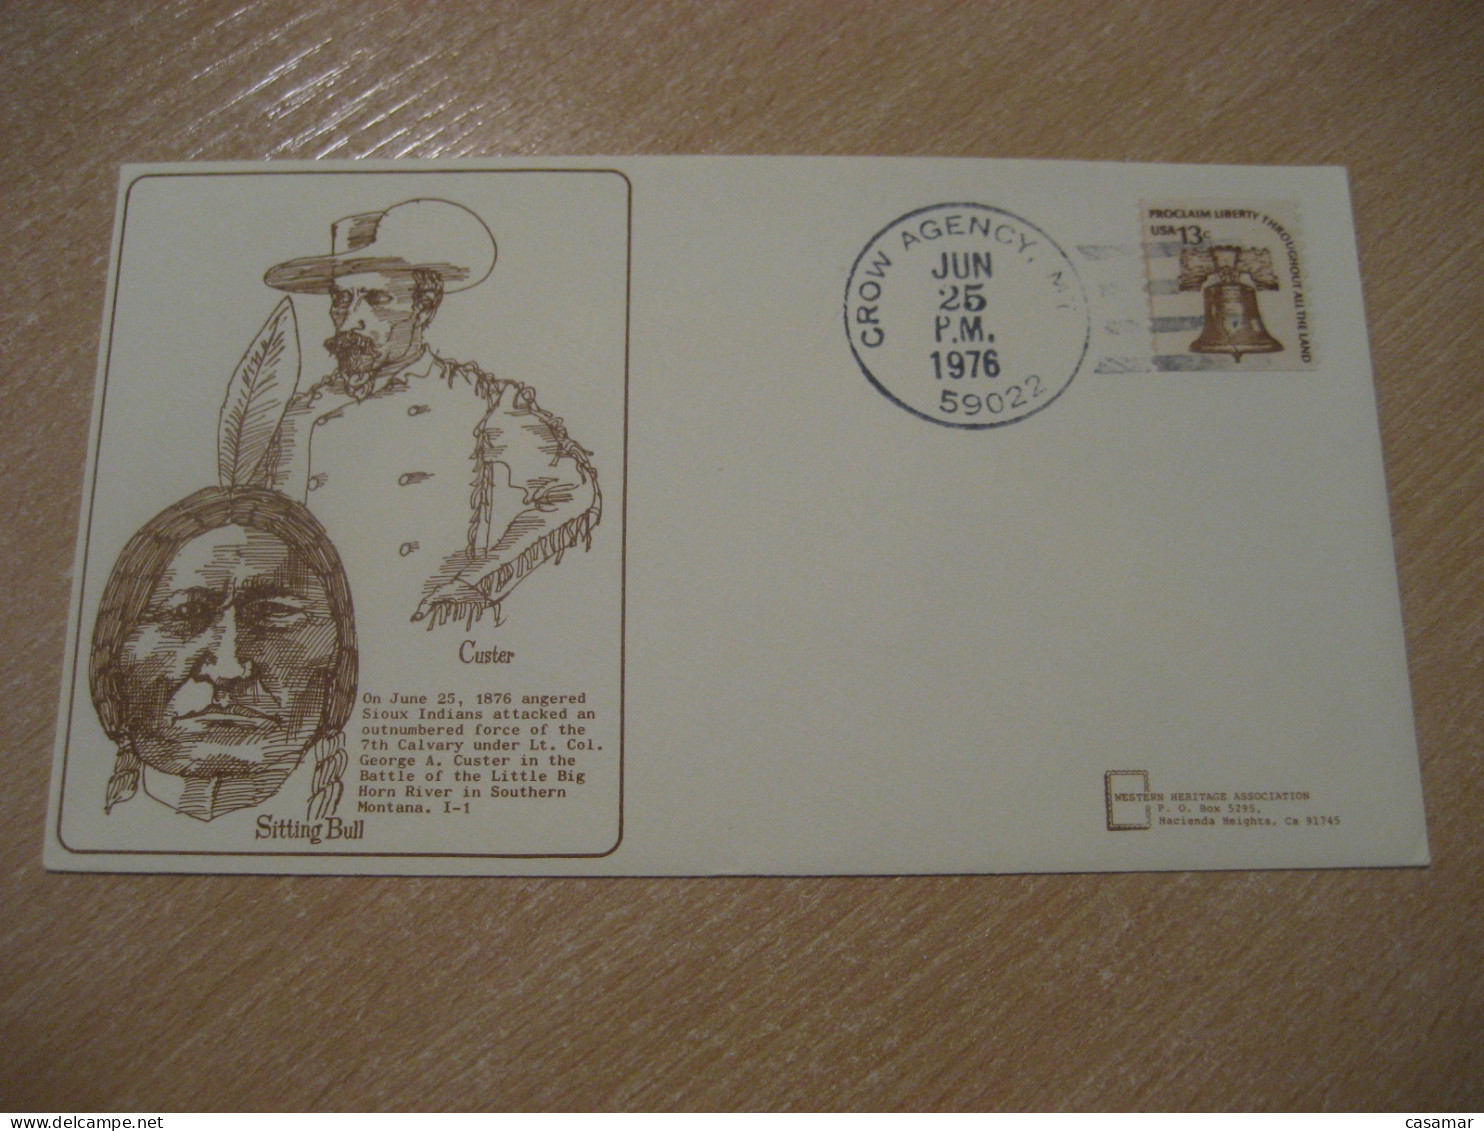 CROW AGENCY 1976 Custer Sitting Bull American Indians Indian Cancel Cover USA Indigenous Native History - Indios Americanas